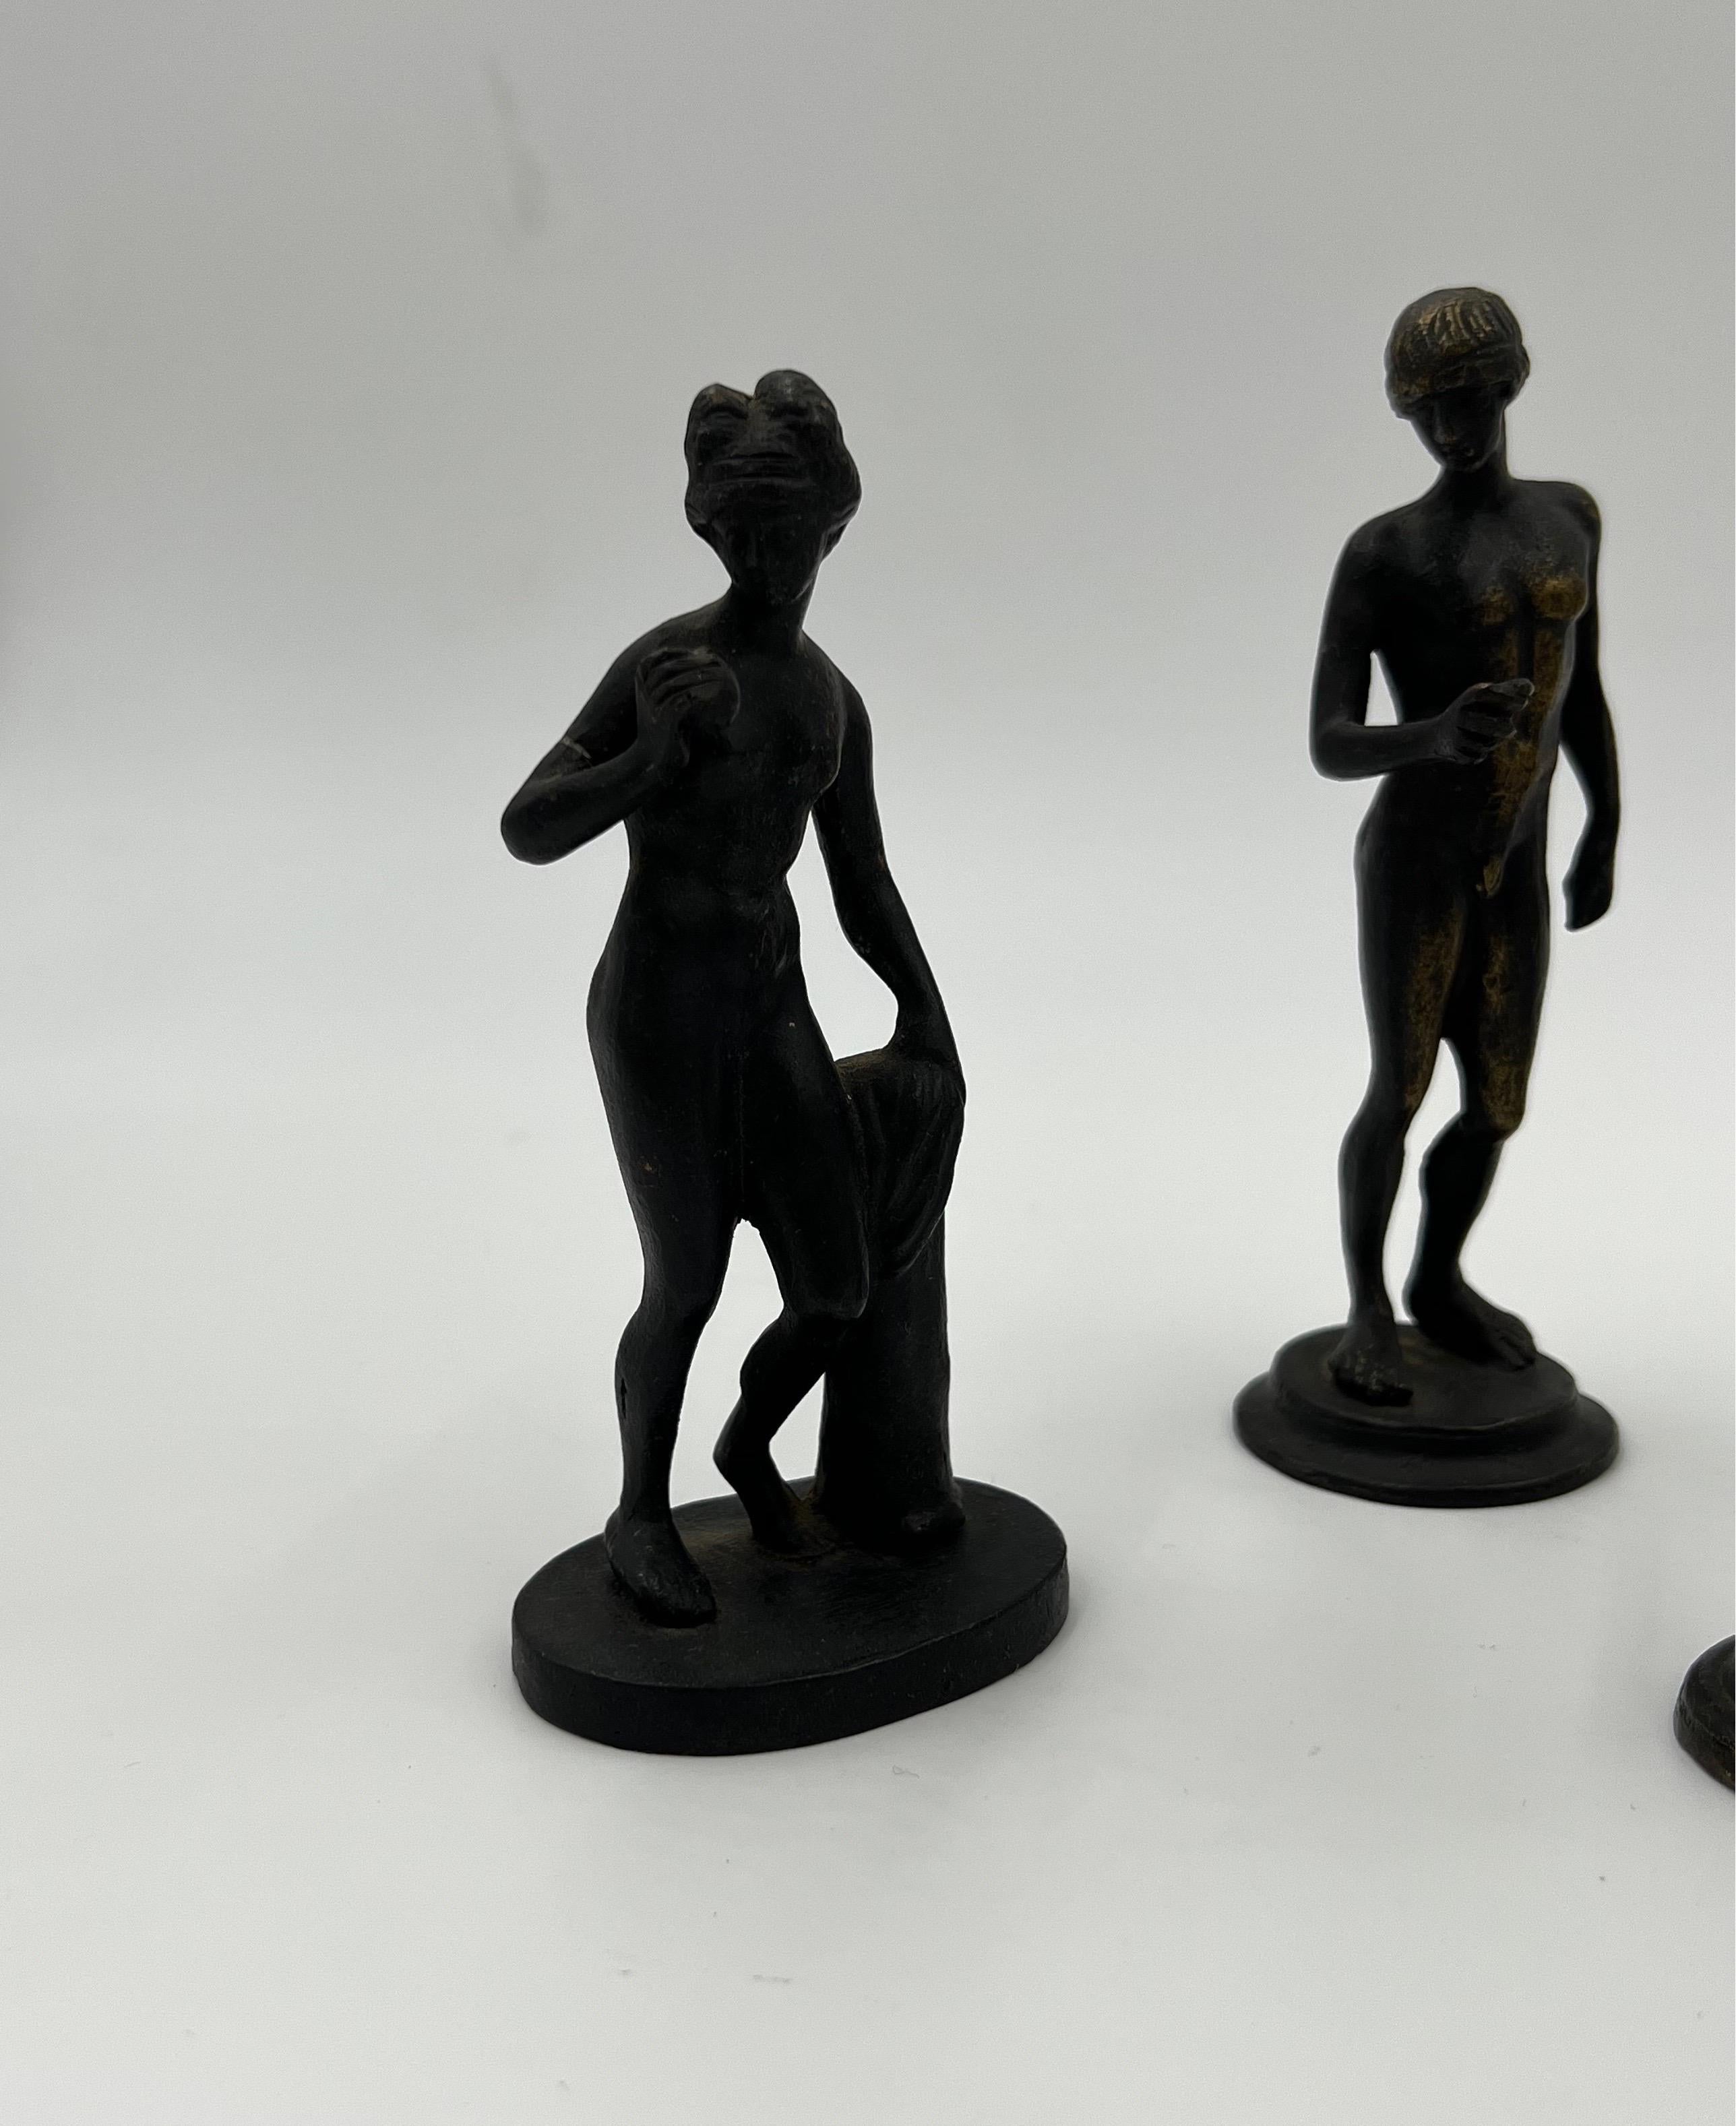 5 Piece Antique Italian Grand Tour Bronze Figures Including Venus, Eros & More!

Each cabinet size grand tour figure modeled after the antiquity. Eros with dolphin measures 3” and others are roughly 5-5.25”